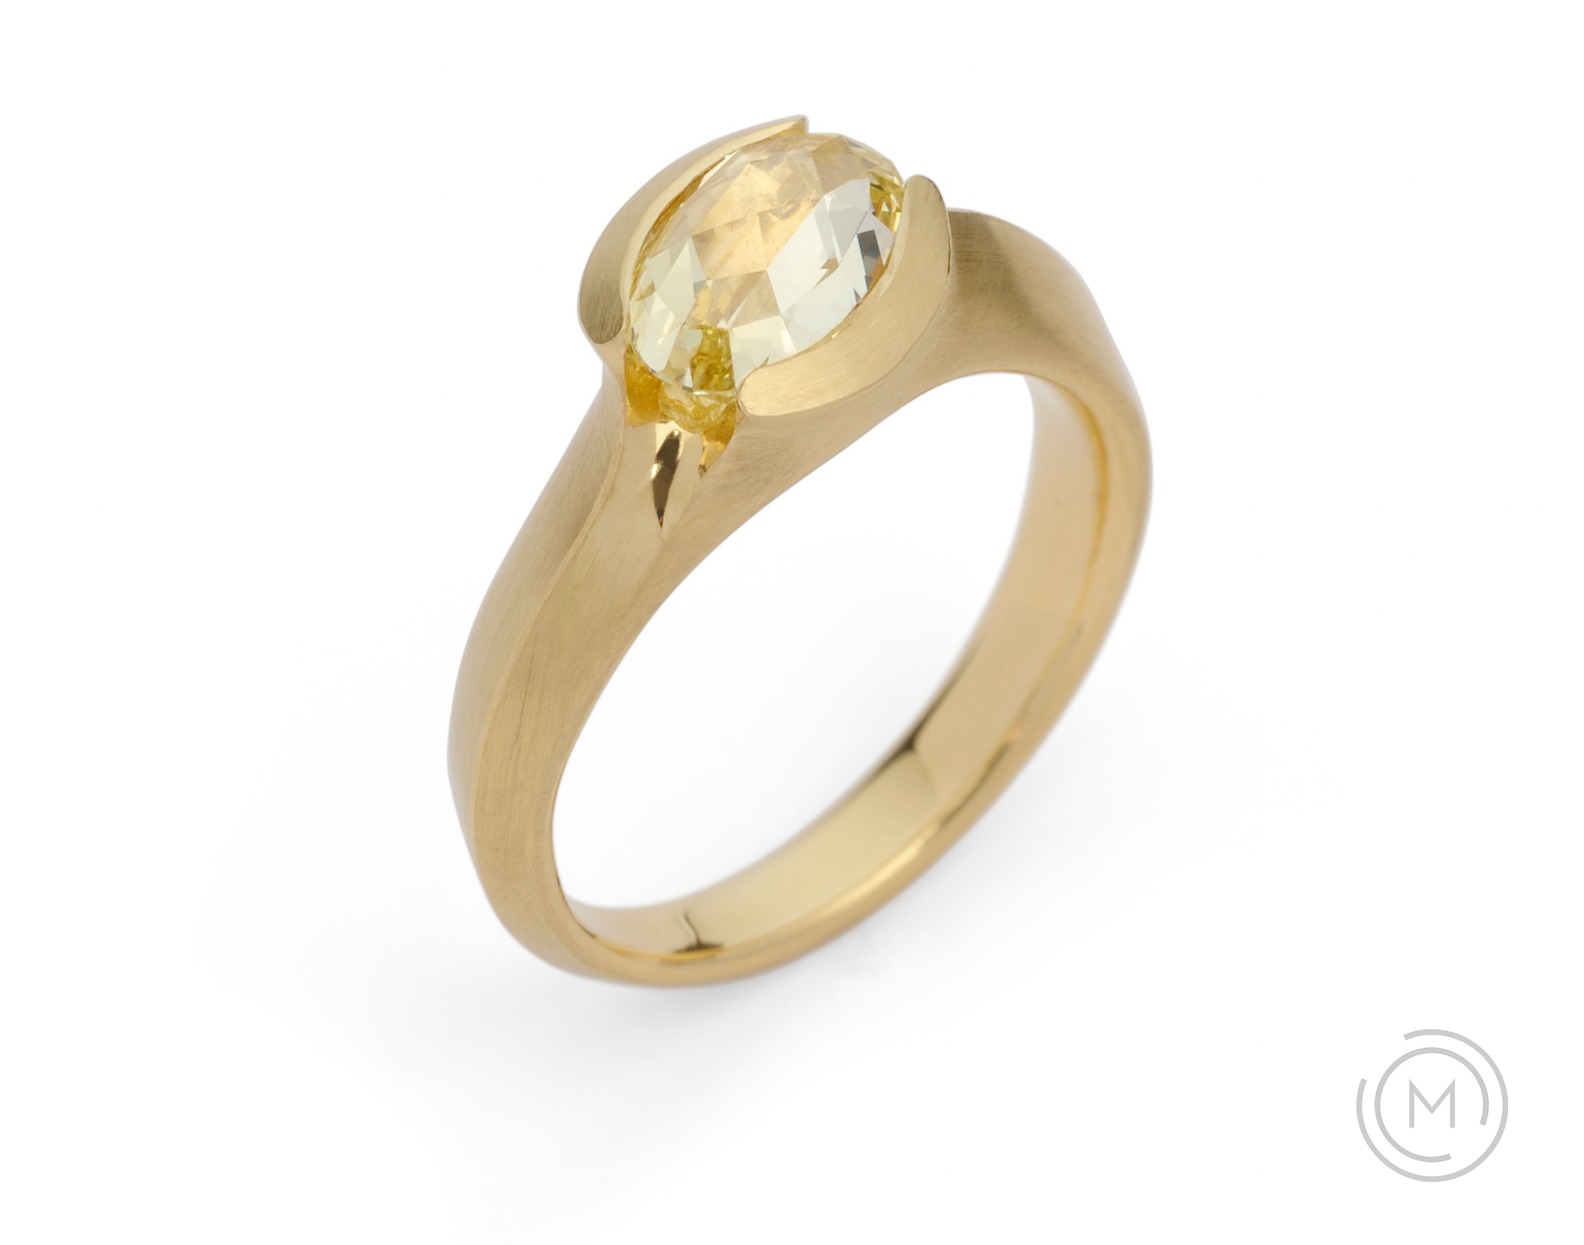 Modern carved gold and yellow diamond engagement ring